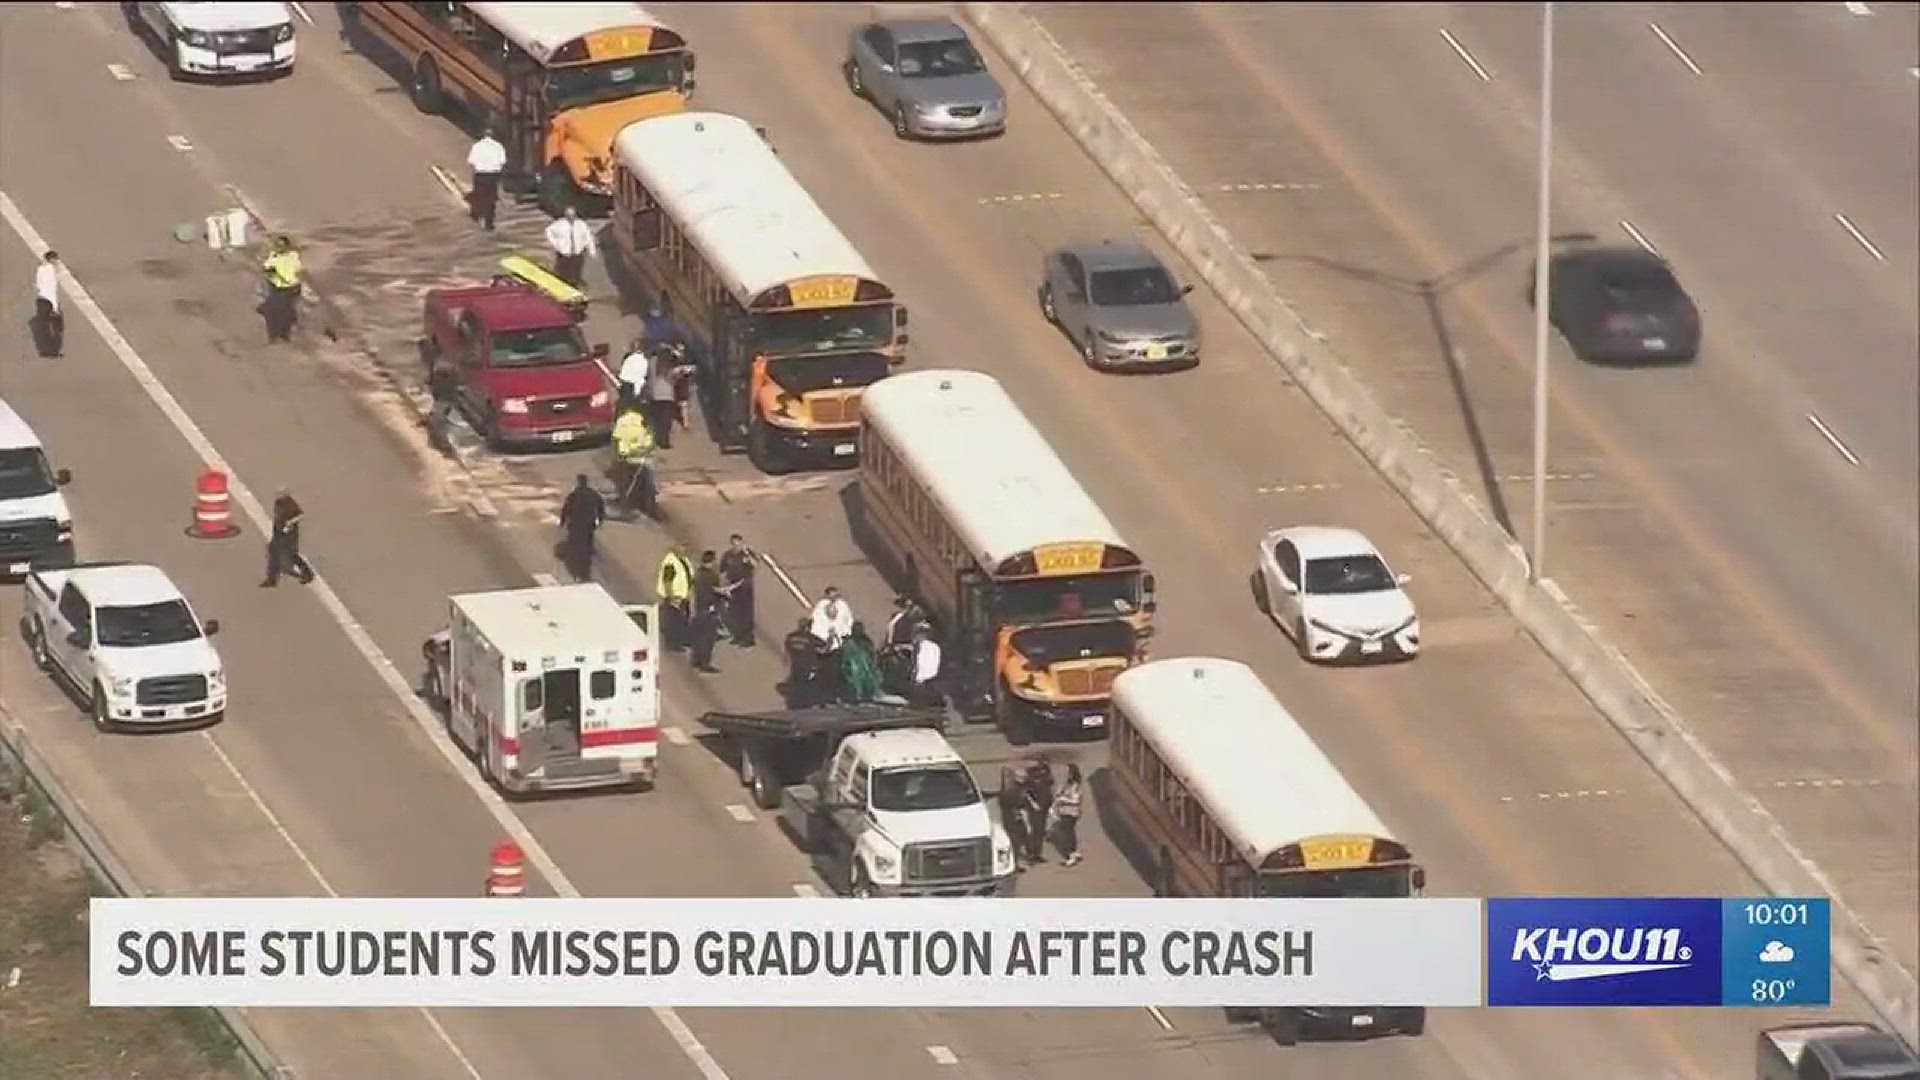 Several Pasadena ISD students on their way to graduation suffered minor injuries Thursday after a crash involving multiple school buses.